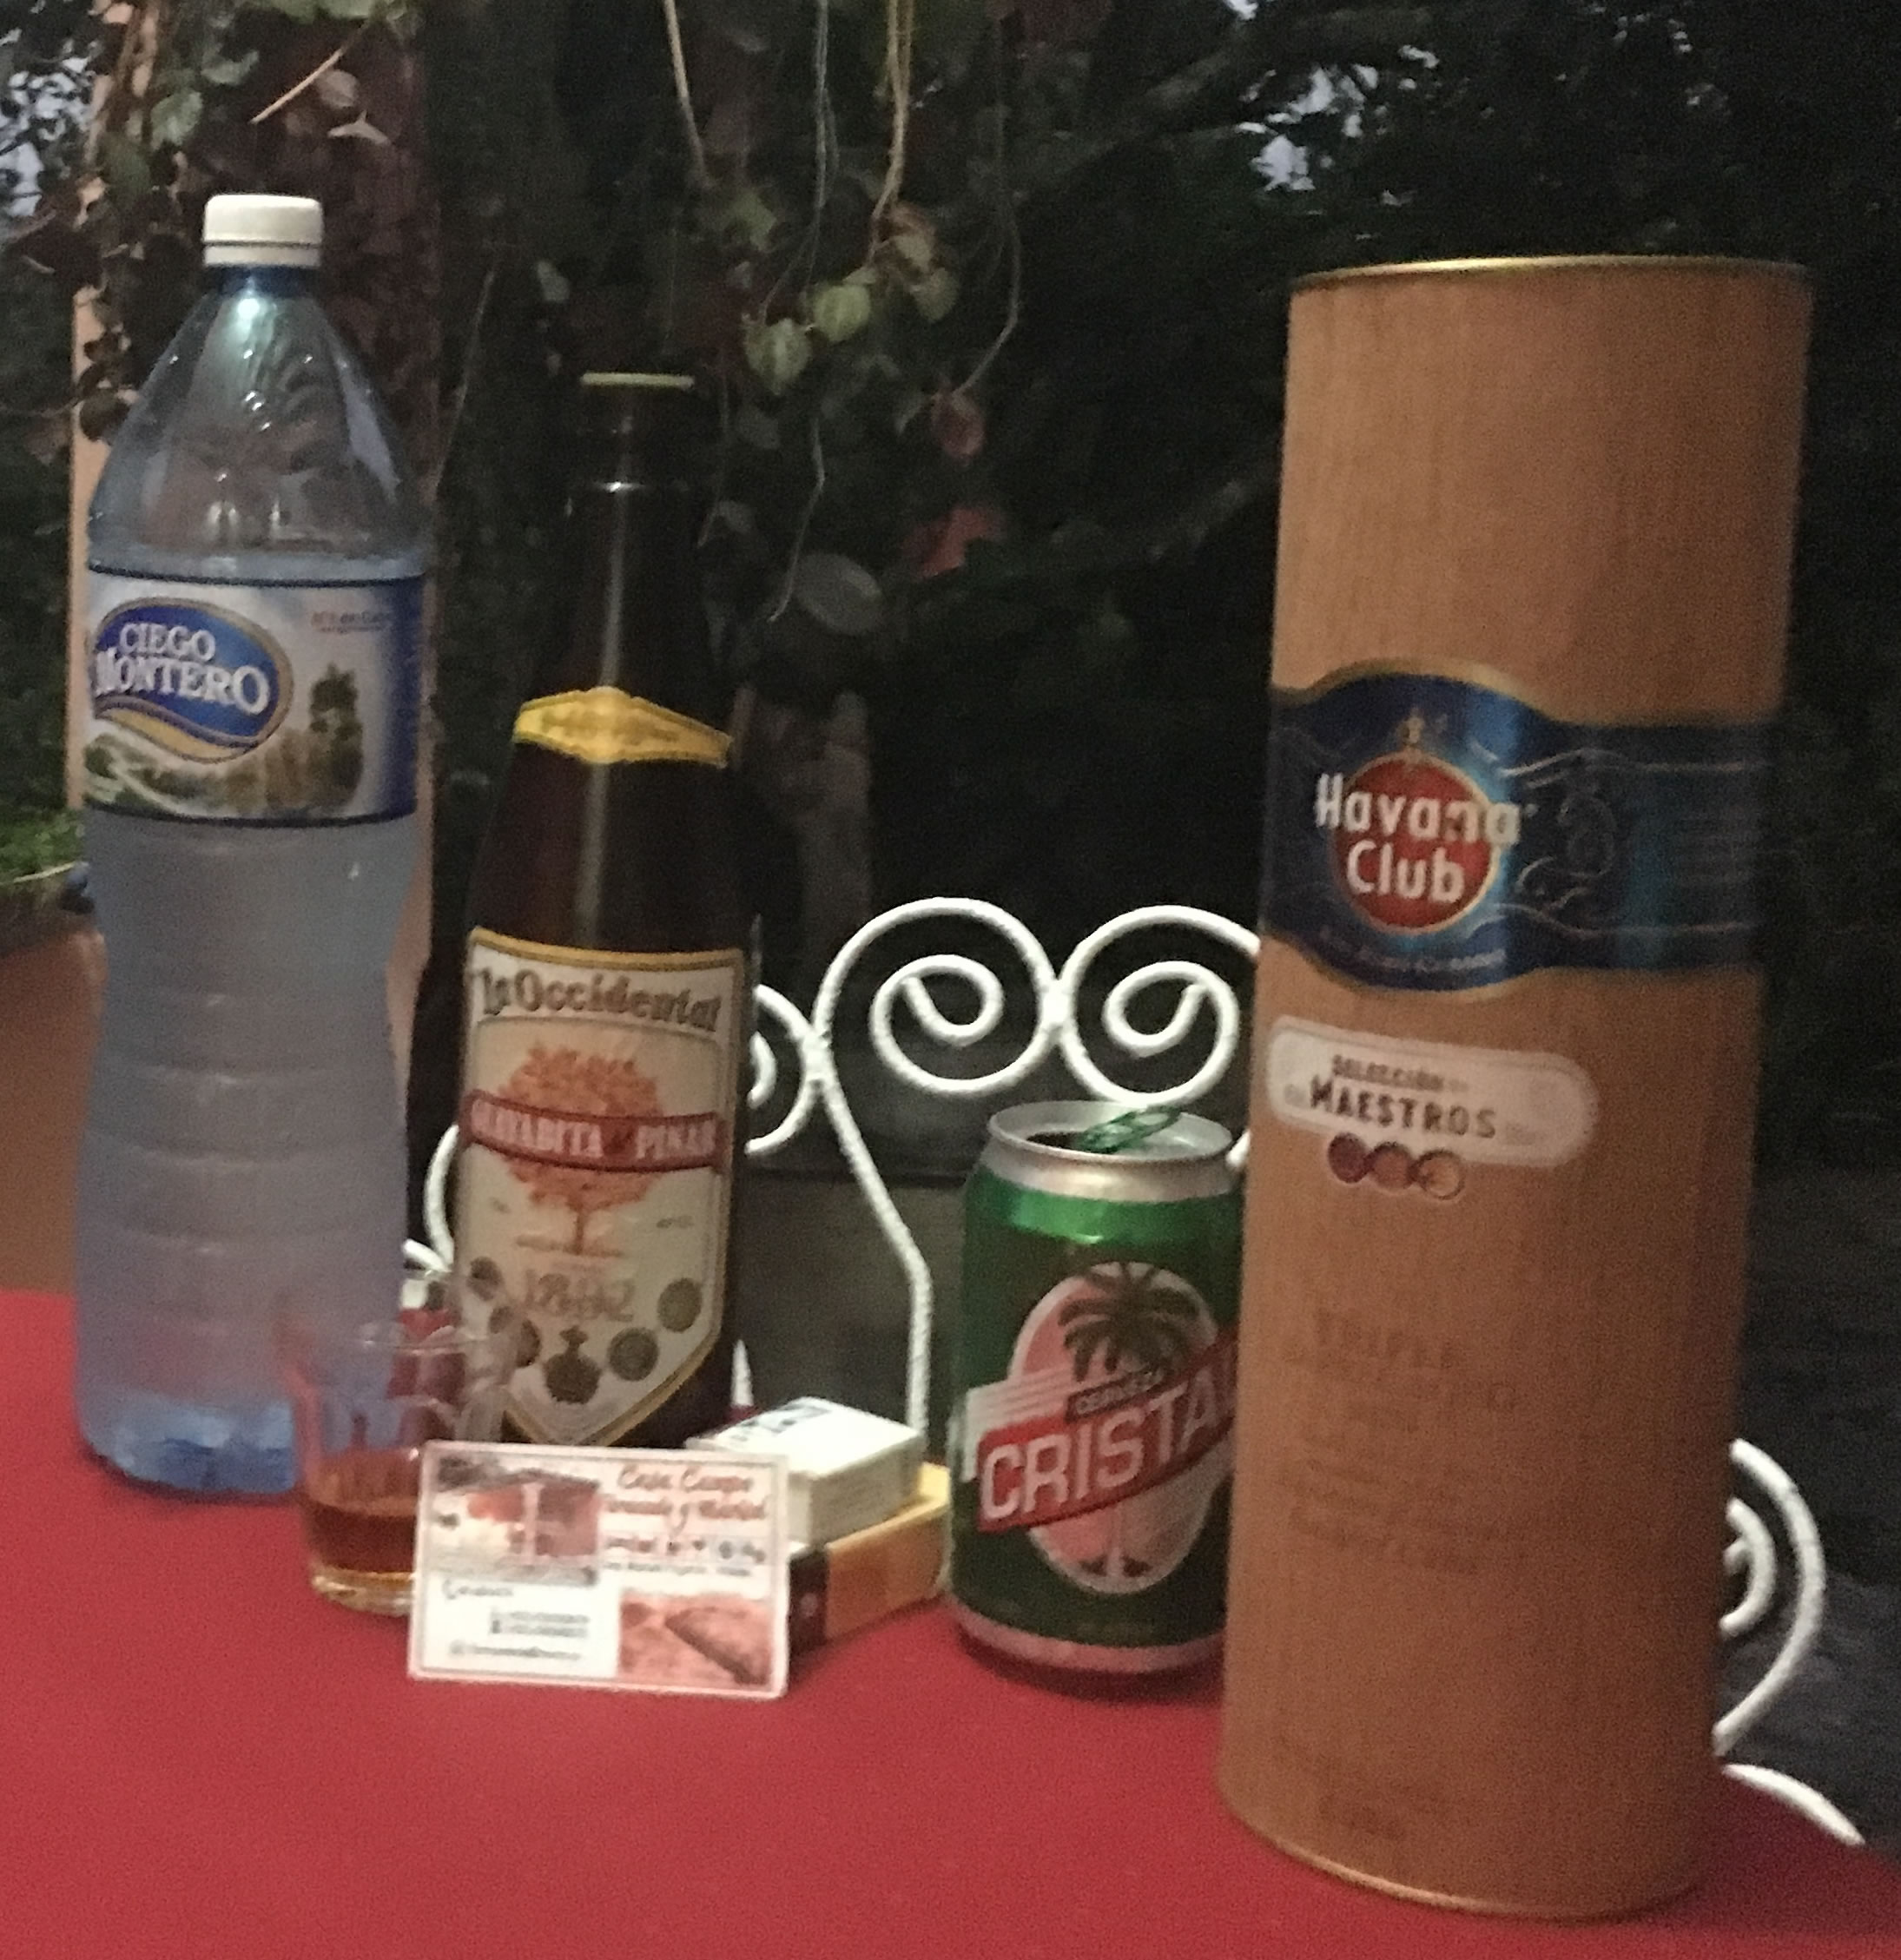 Cuban Rum, Beer, Products, Accounting Play